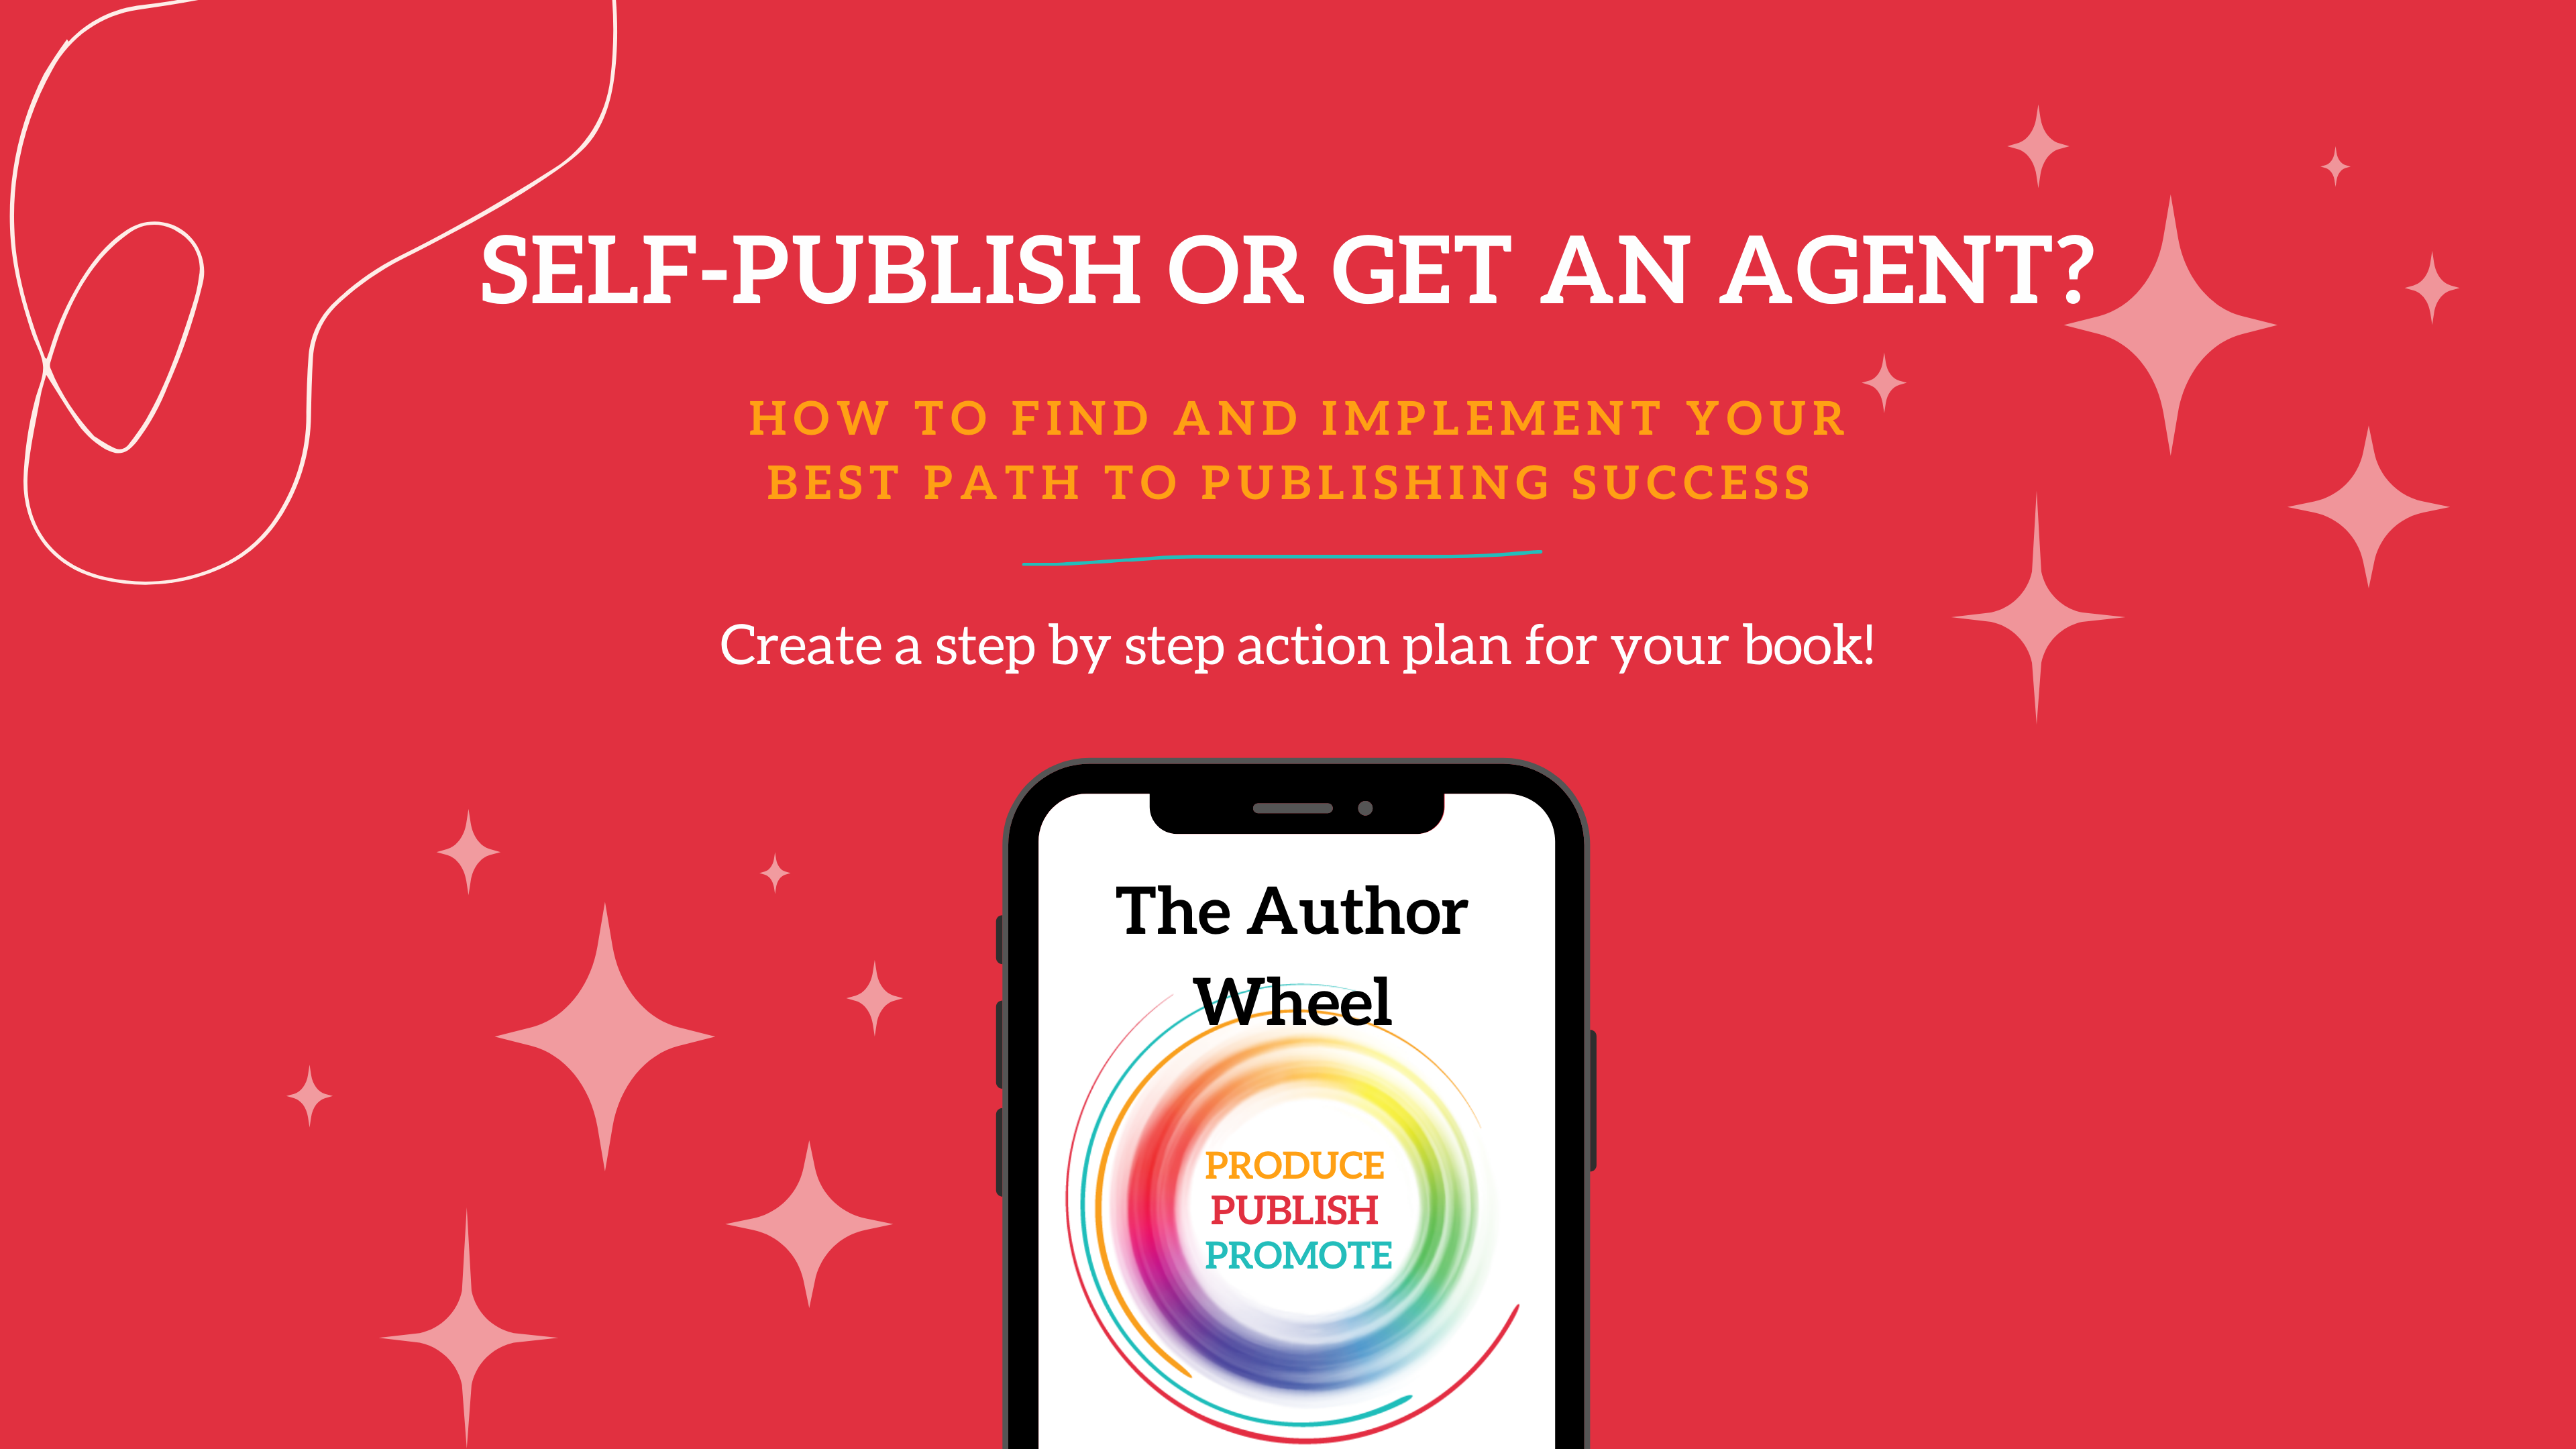 Self-Publish or Get an Agent: How to Find and Implement Your Best Path to Publishing Success